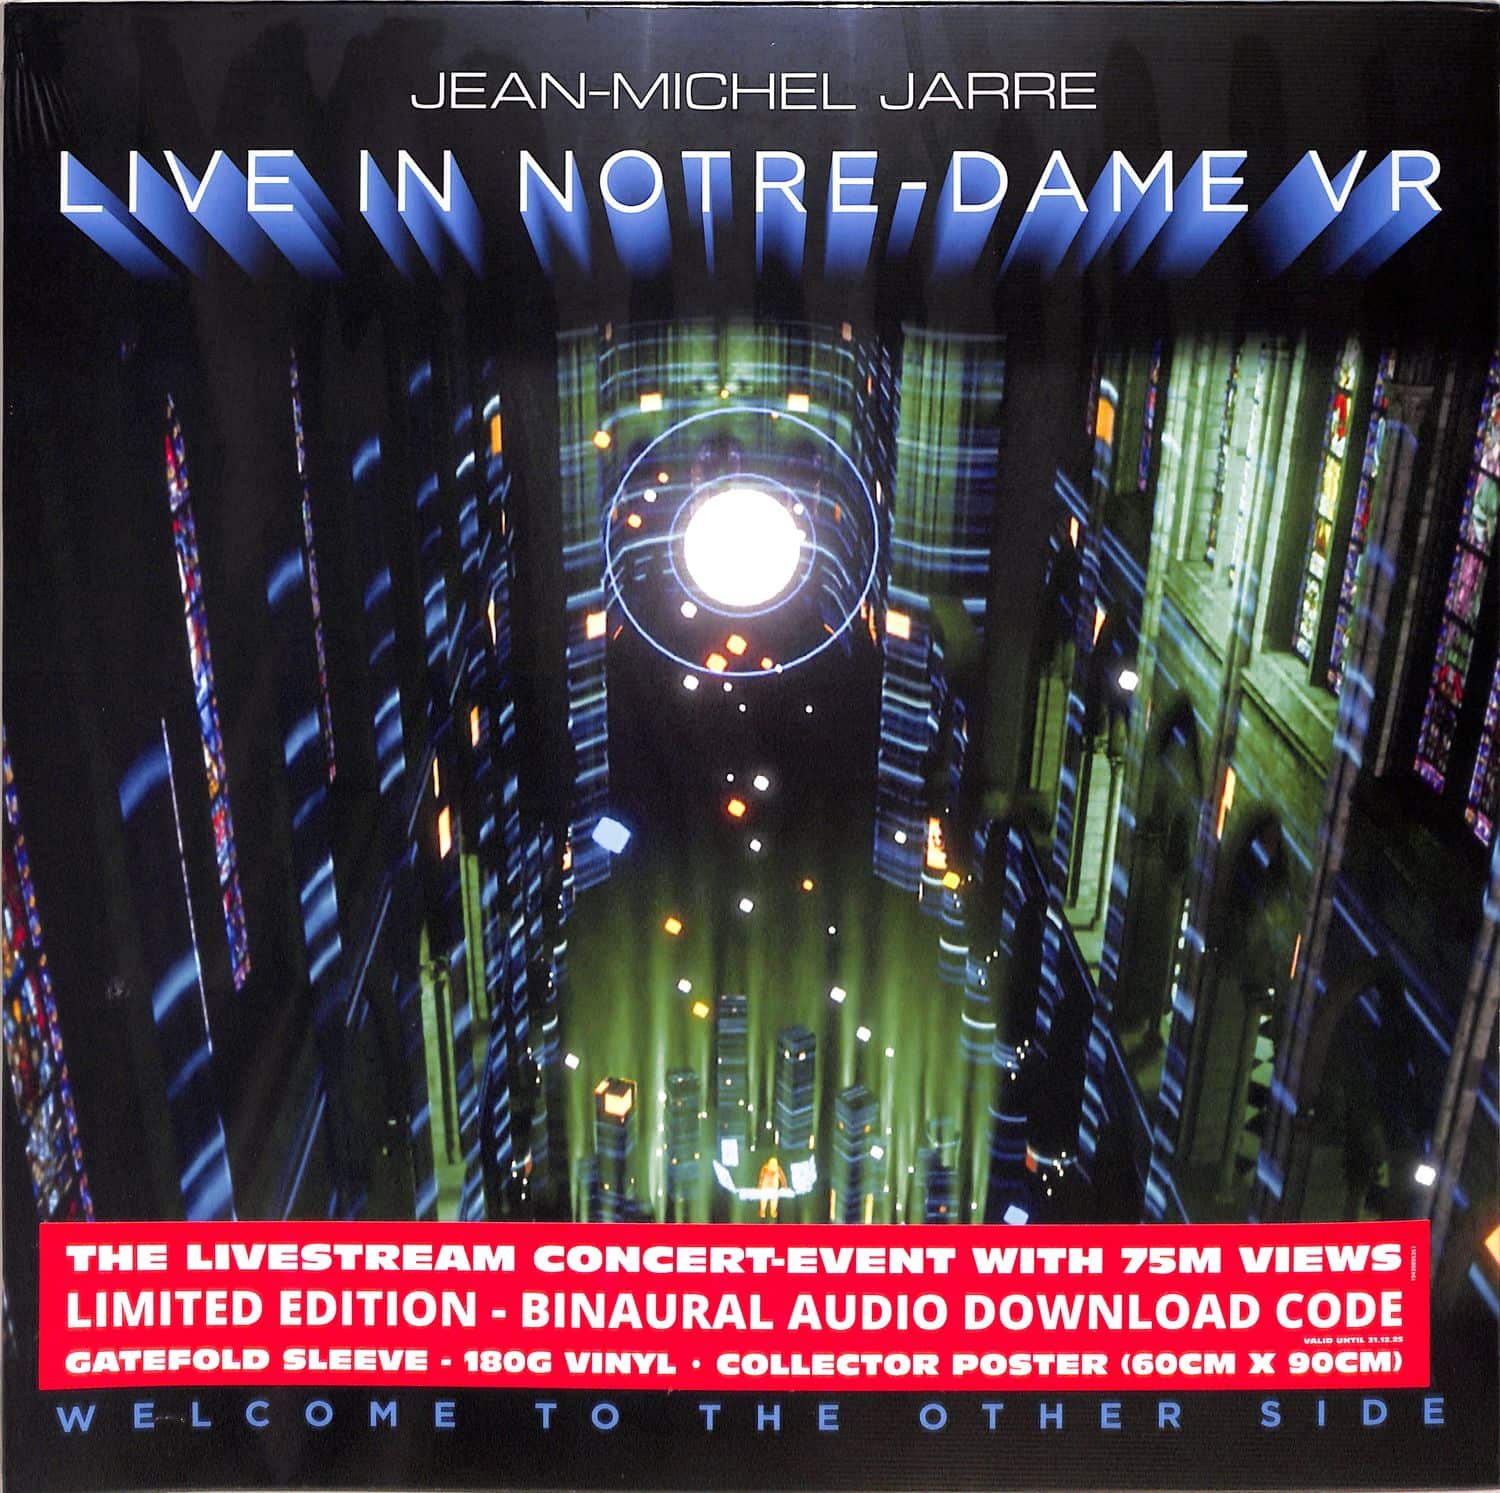 Jean-Michel Jarre - WELCOME TO THE OTHER SIDE 